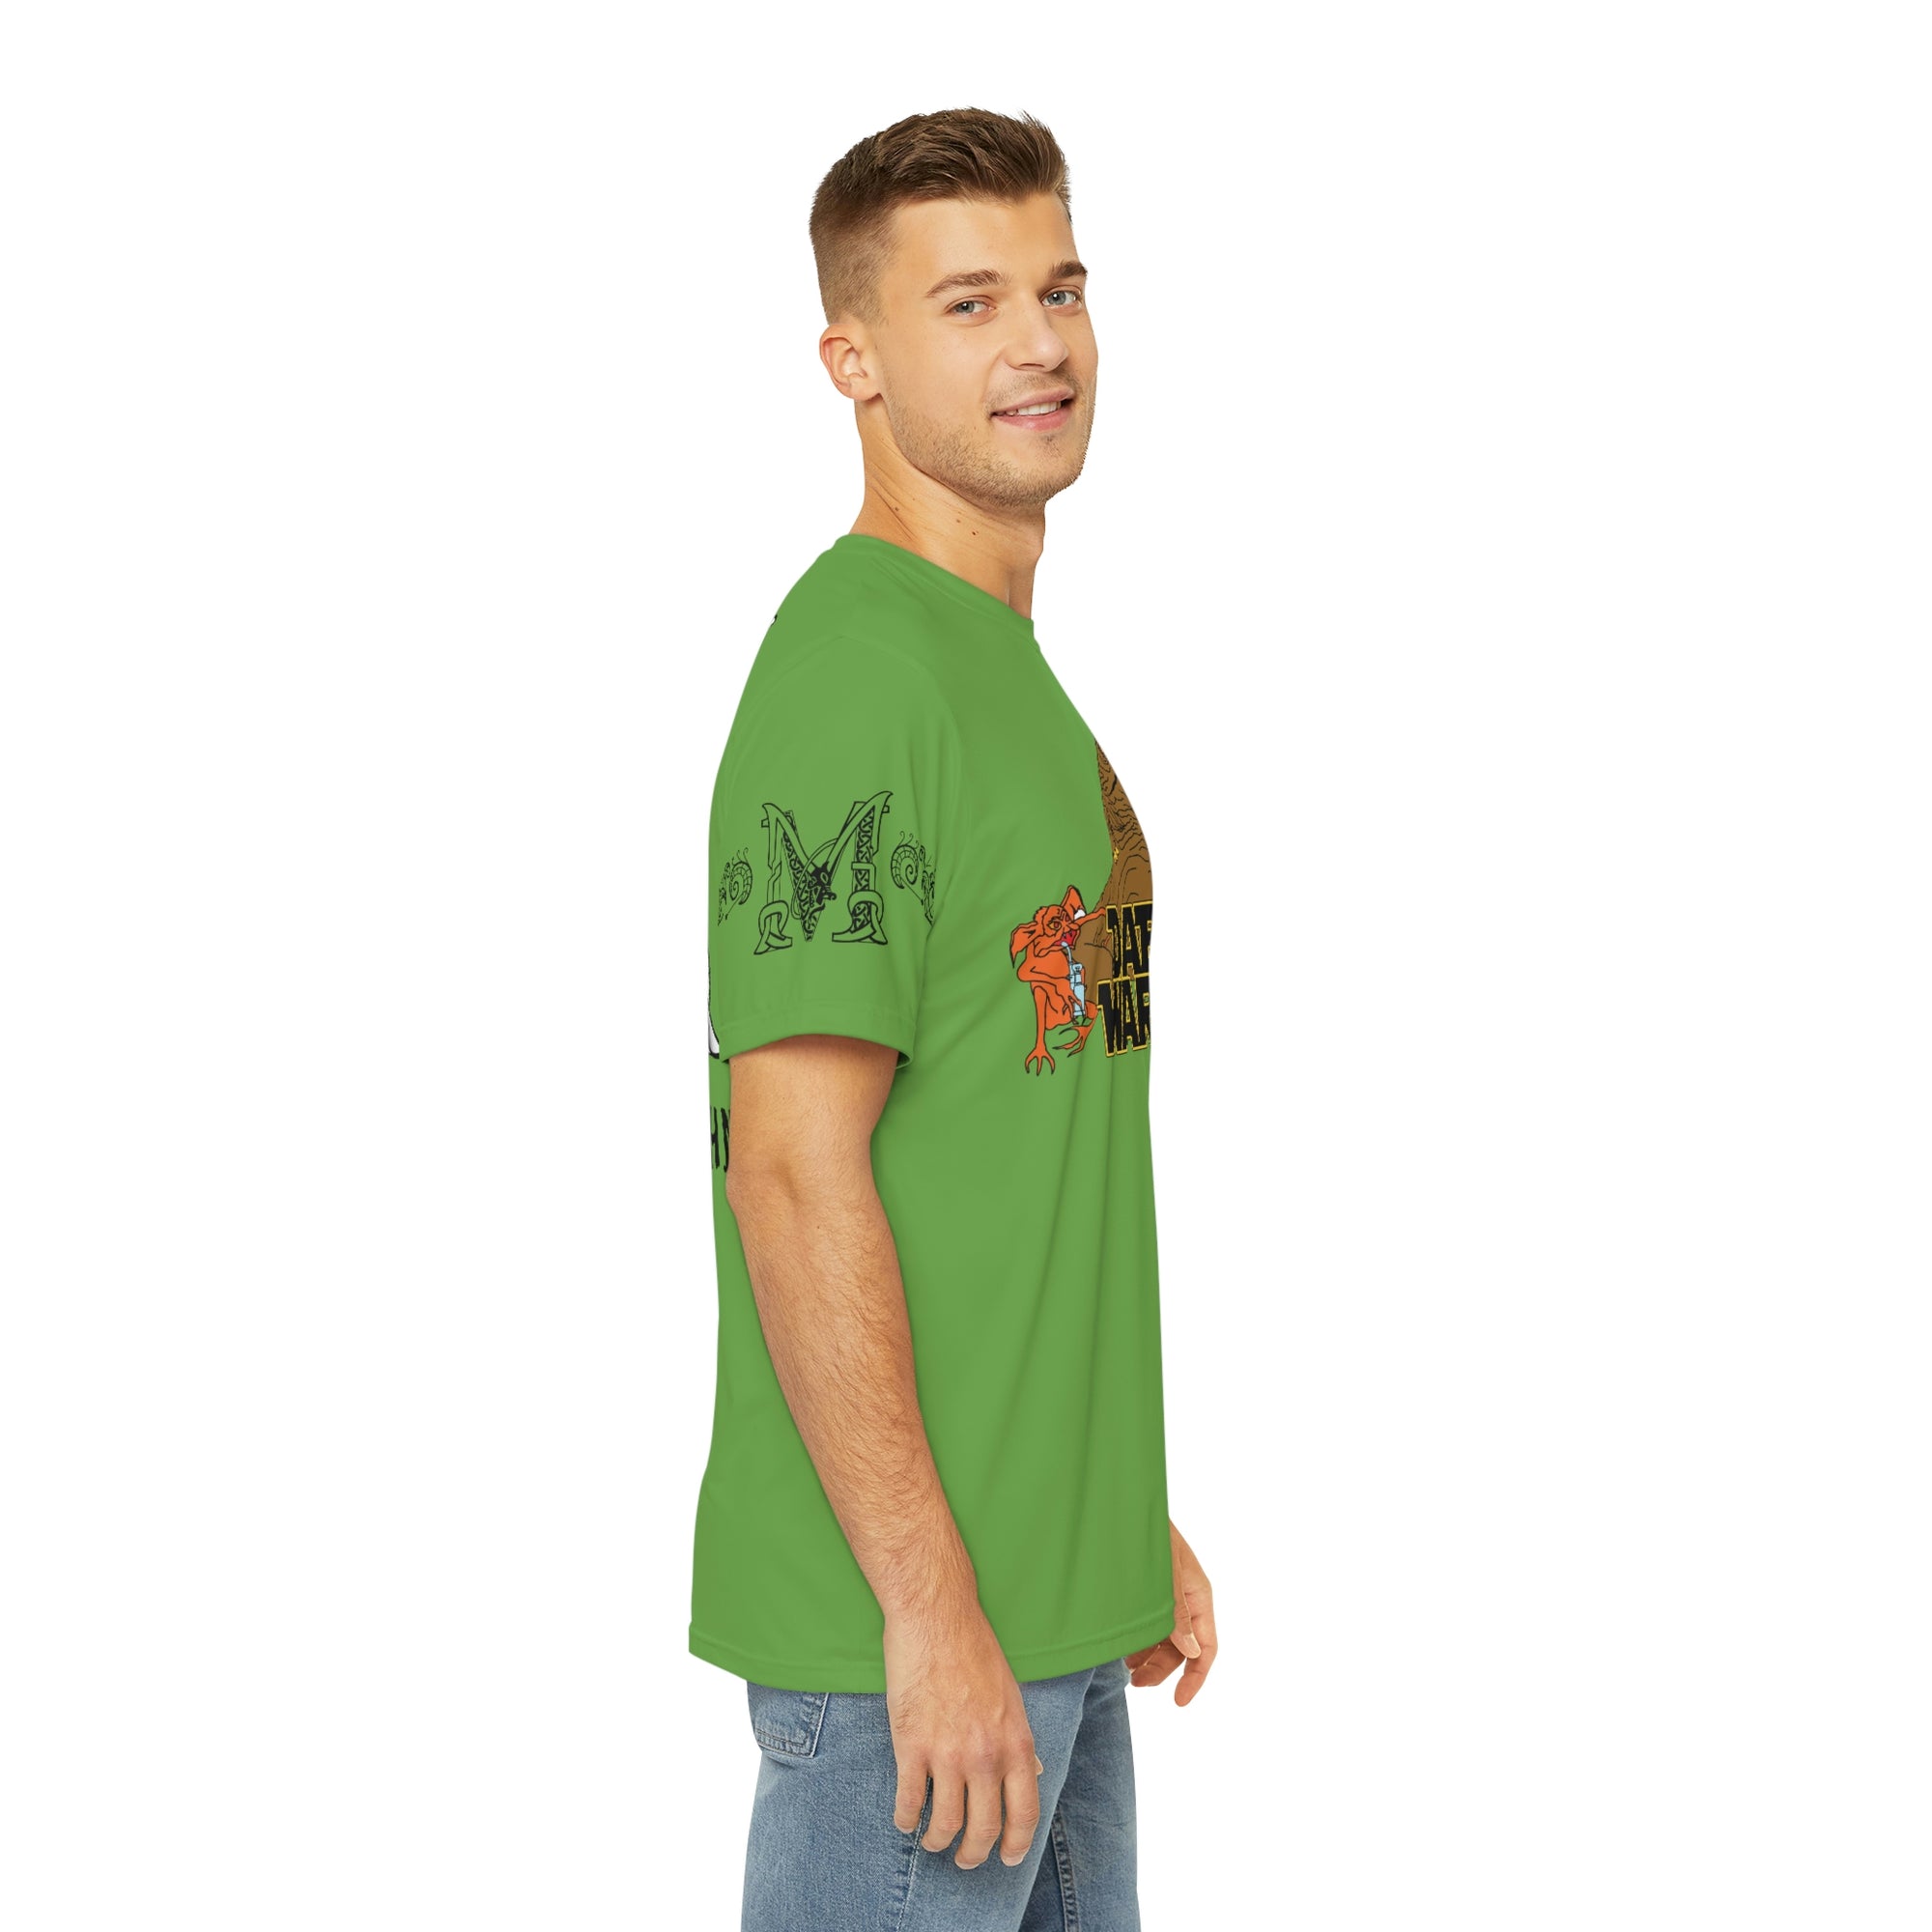 Dab Wars Weed Jedi Jabba The Dab Mando Men&#39;s Polyester Tee (AOP) By Curtis Wohlgemuth X Mythical Merch